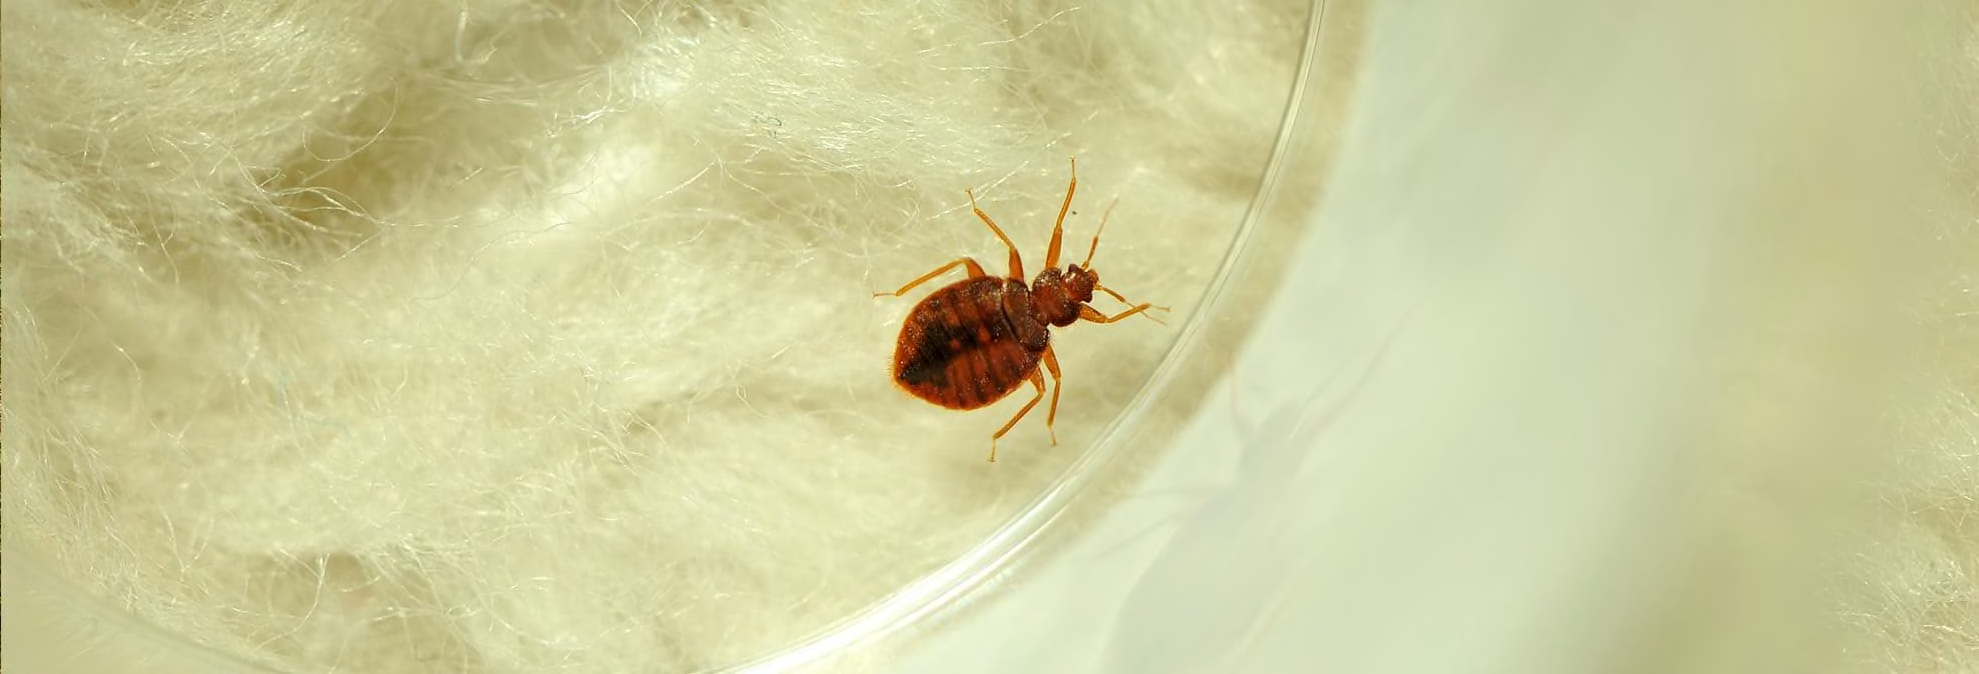 How To Get Rid Of Bed Bugs Consumer Reports